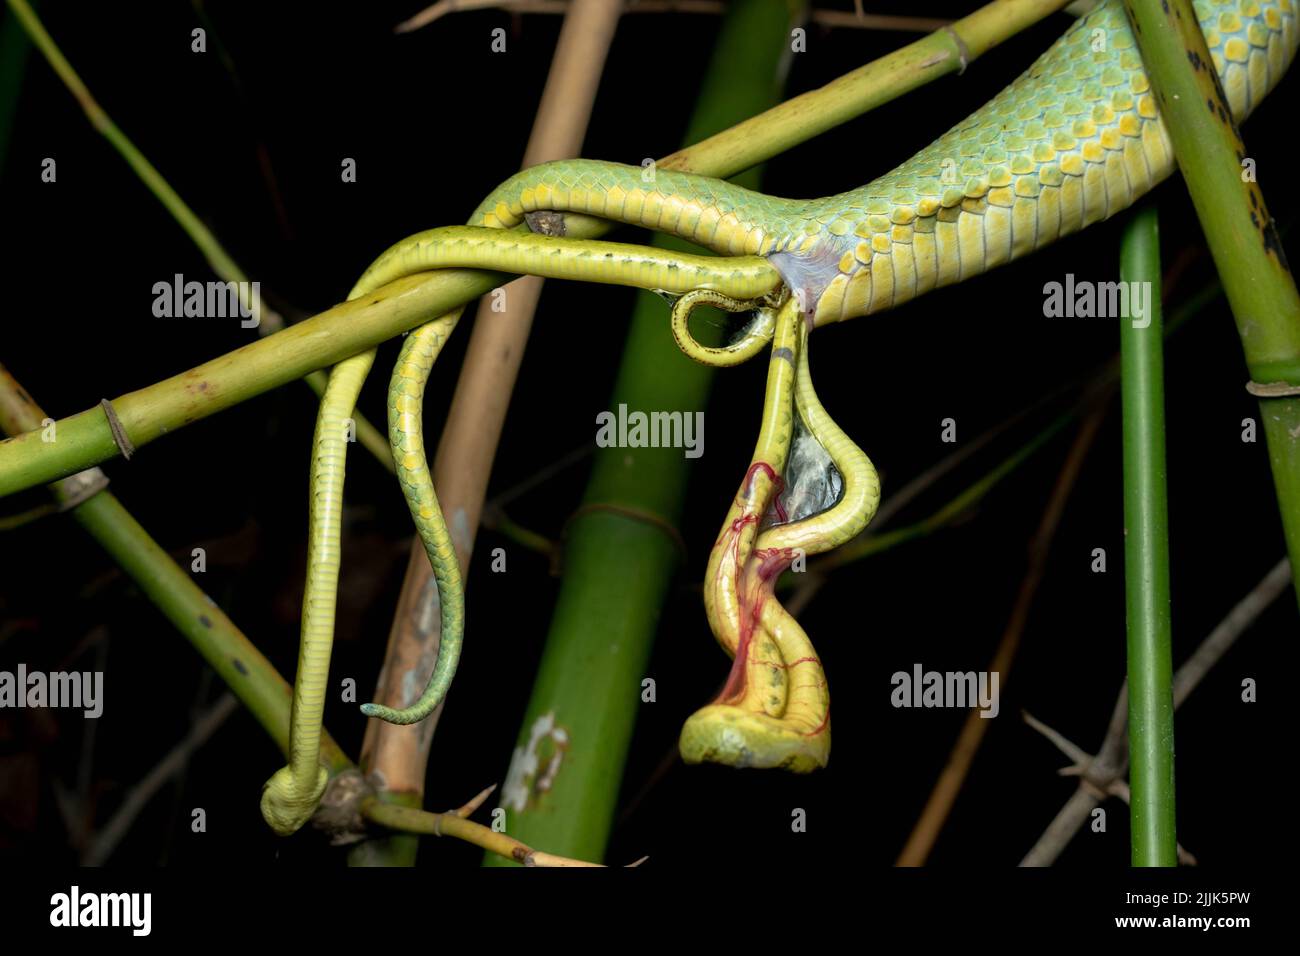 Multiple babies coming out at once. Valsad, India: THESE INCREDIBLE images capture a rare site of a snake giving birth, multiple tails extending from Stock Photo